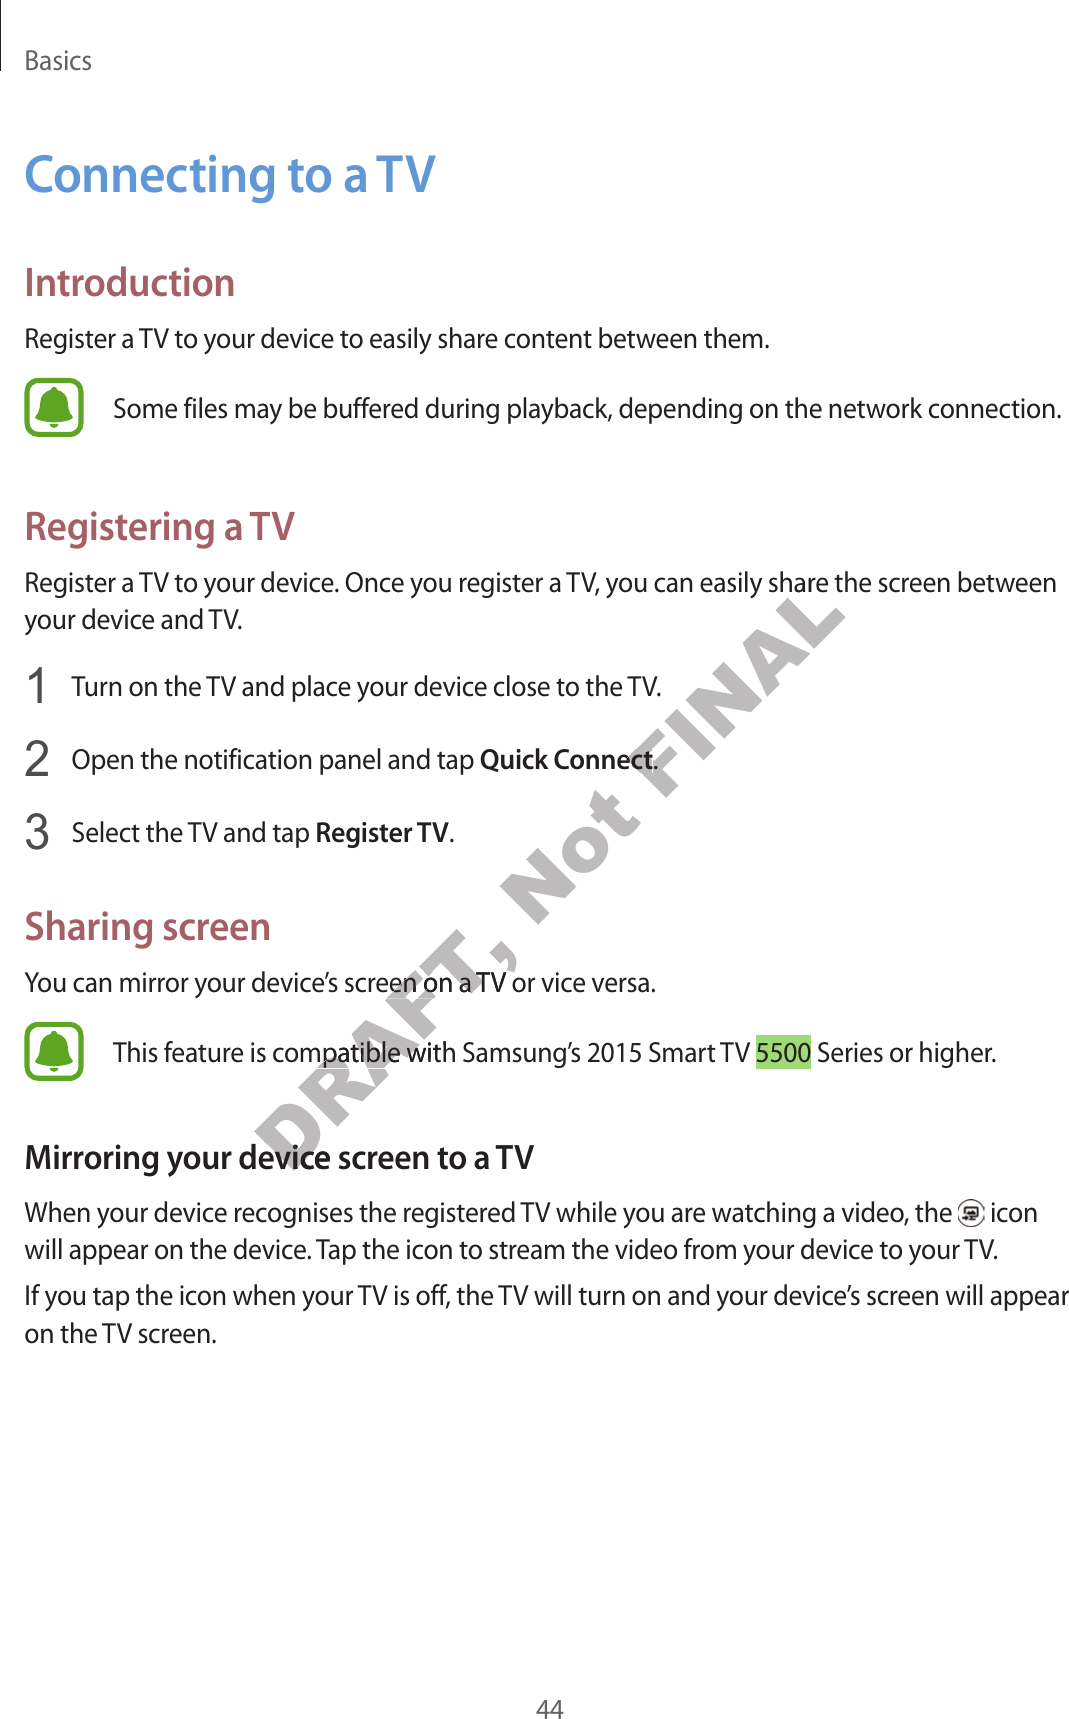 Basics44Connecting to a TVIntroductionRegister a TV to your device to easily share content between them.Some files may be buffered during playback, depending on the network connection.Registering a TVRegister a TV to your device. Once you register a TV, you can easily share the screen between your device and TV. Turn on the TV and place your device close to the TV. Open the notification panel and tap Quick Connect. Select the TV and tap Register TV.Sharing screenYou can mirror your device’s screen on a TV or vice versa.This feature is compatible with Samsung’s 2015 Smart TV 5500 Series or higher.Mirroring your device screen to a TVWhen your device recognises the registered TV while you are watching a video, the   icon will appear on the device. Tap the icon to stream the video from your device to your TV.If you tap the icon when your TV is off, the TV will turn on and your device’s screen will appear on the TV screen.DRAFT, s screen on a TV or vics screen on a TV or vicDRAFT, ompatible with Sompatible with Sour device scrour device scrNot FINALou can easily share the scrou can easily sharonnectonnect..